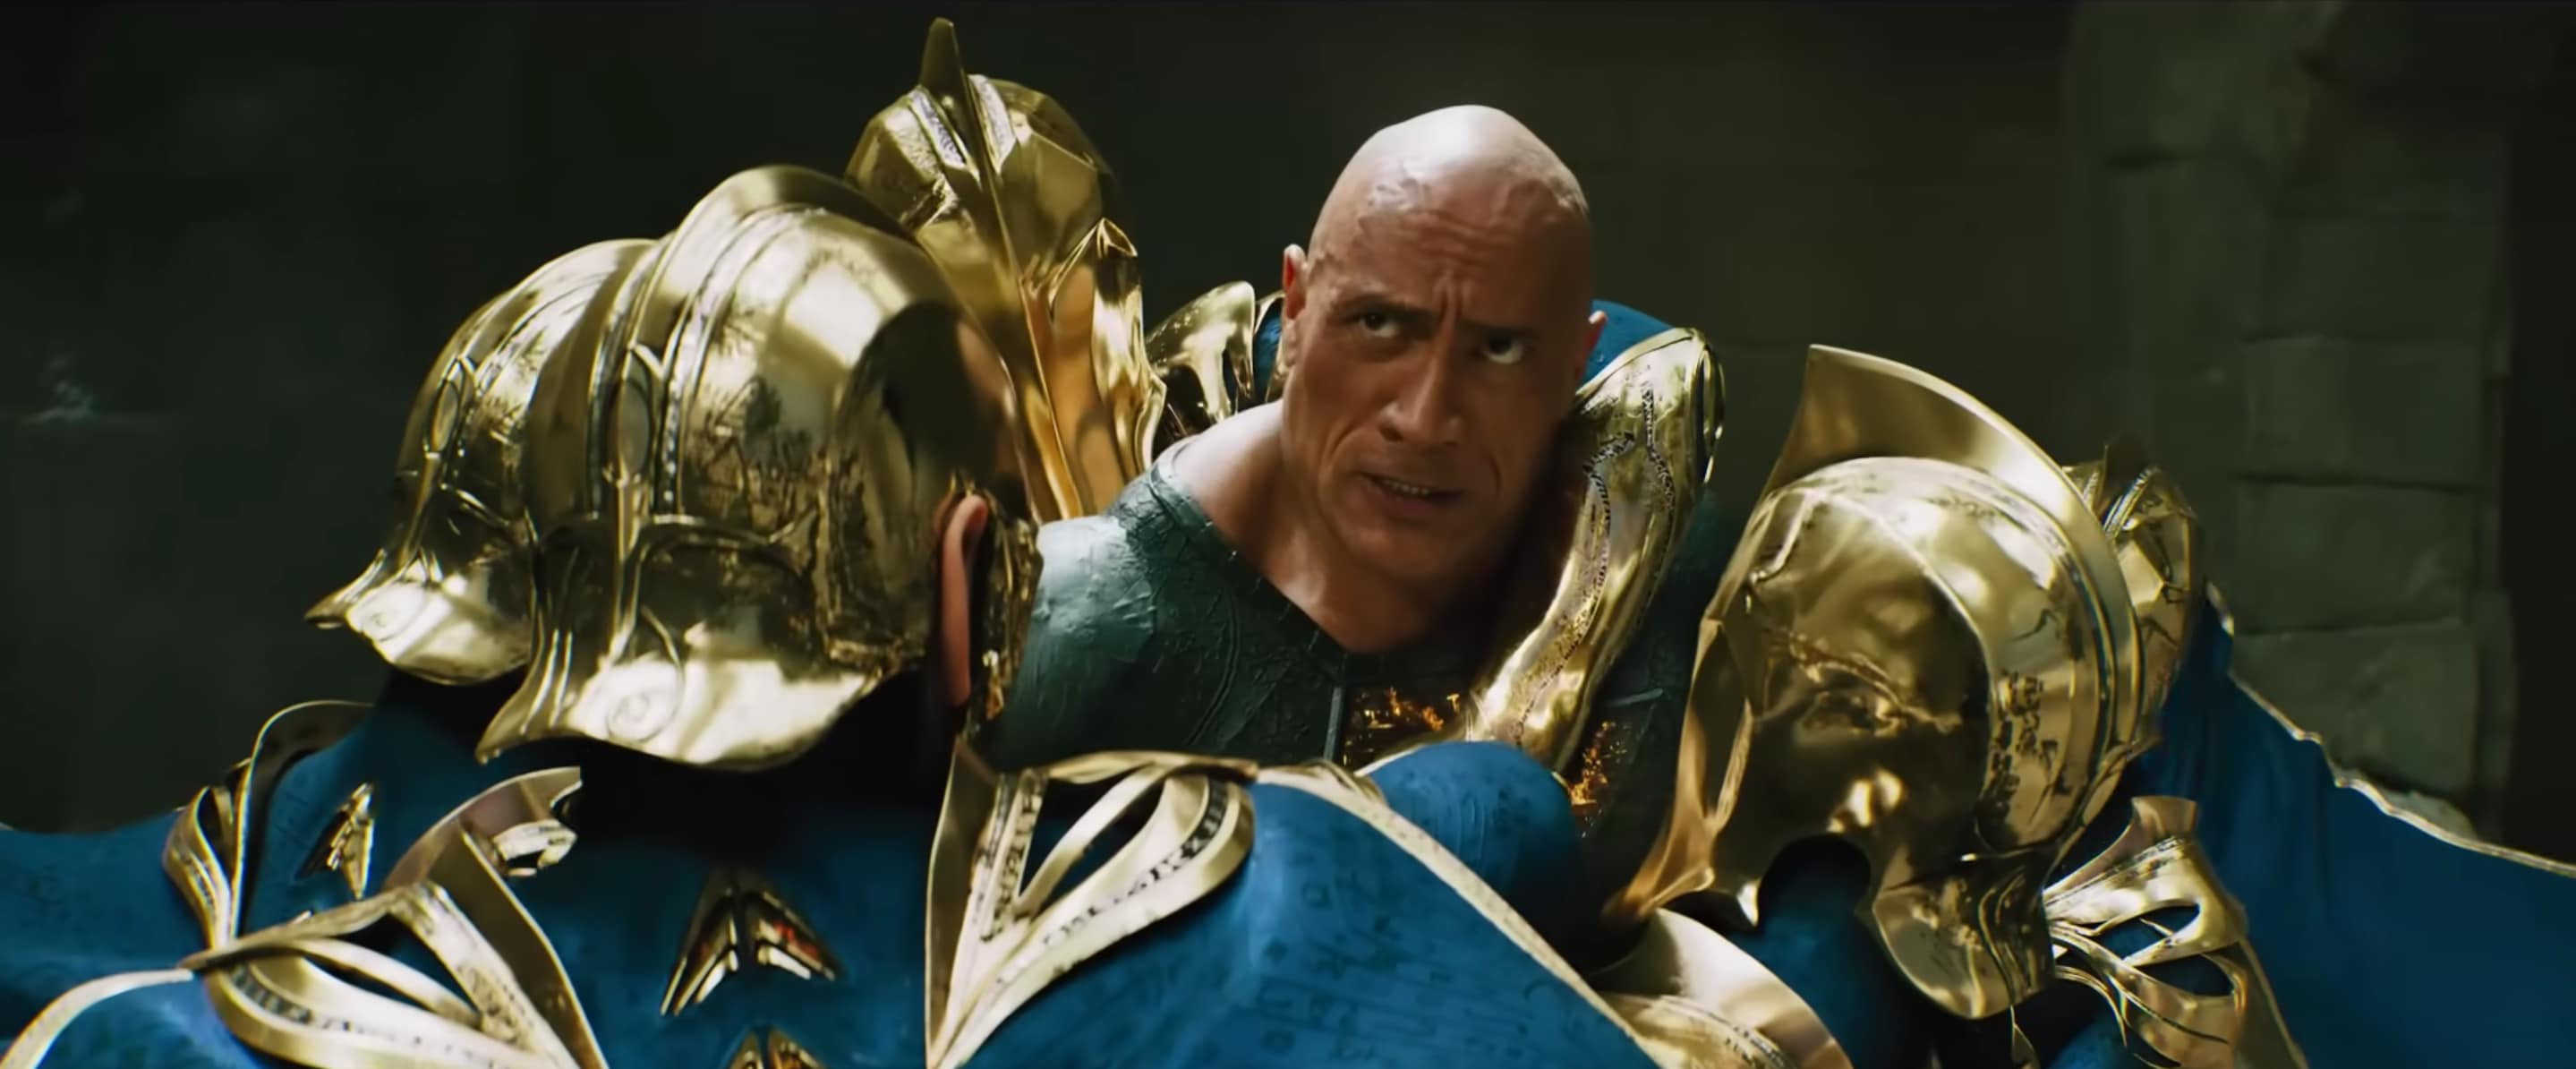 Dwayne Johnson in a still from the movie.